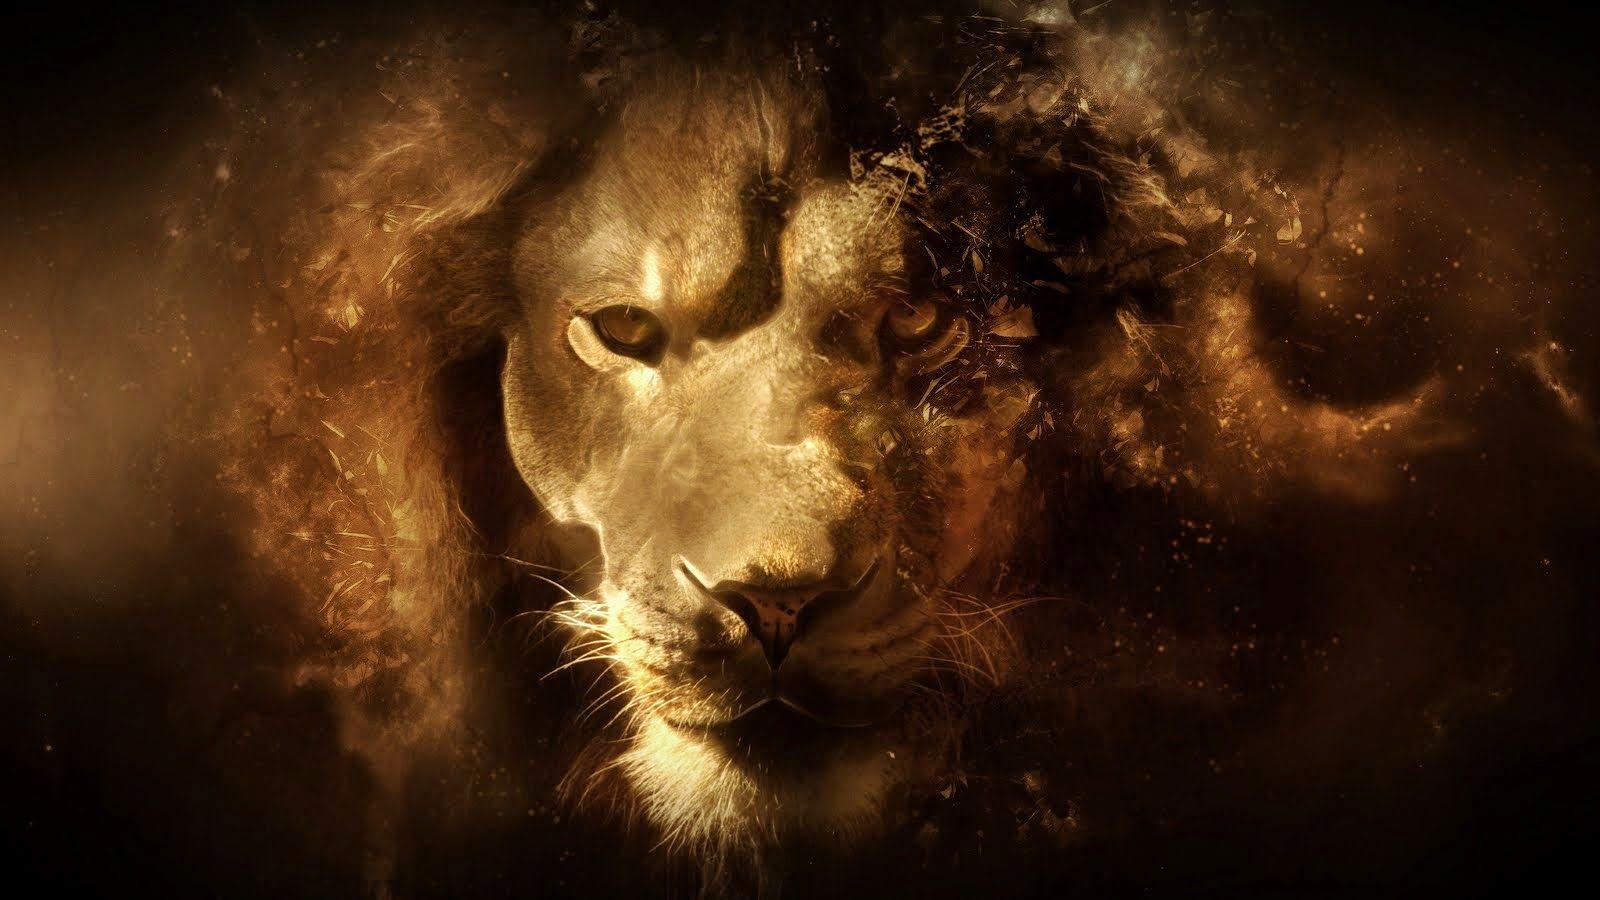 The Chronicles Of Narnia wallpapers HD for desktop backgrounds